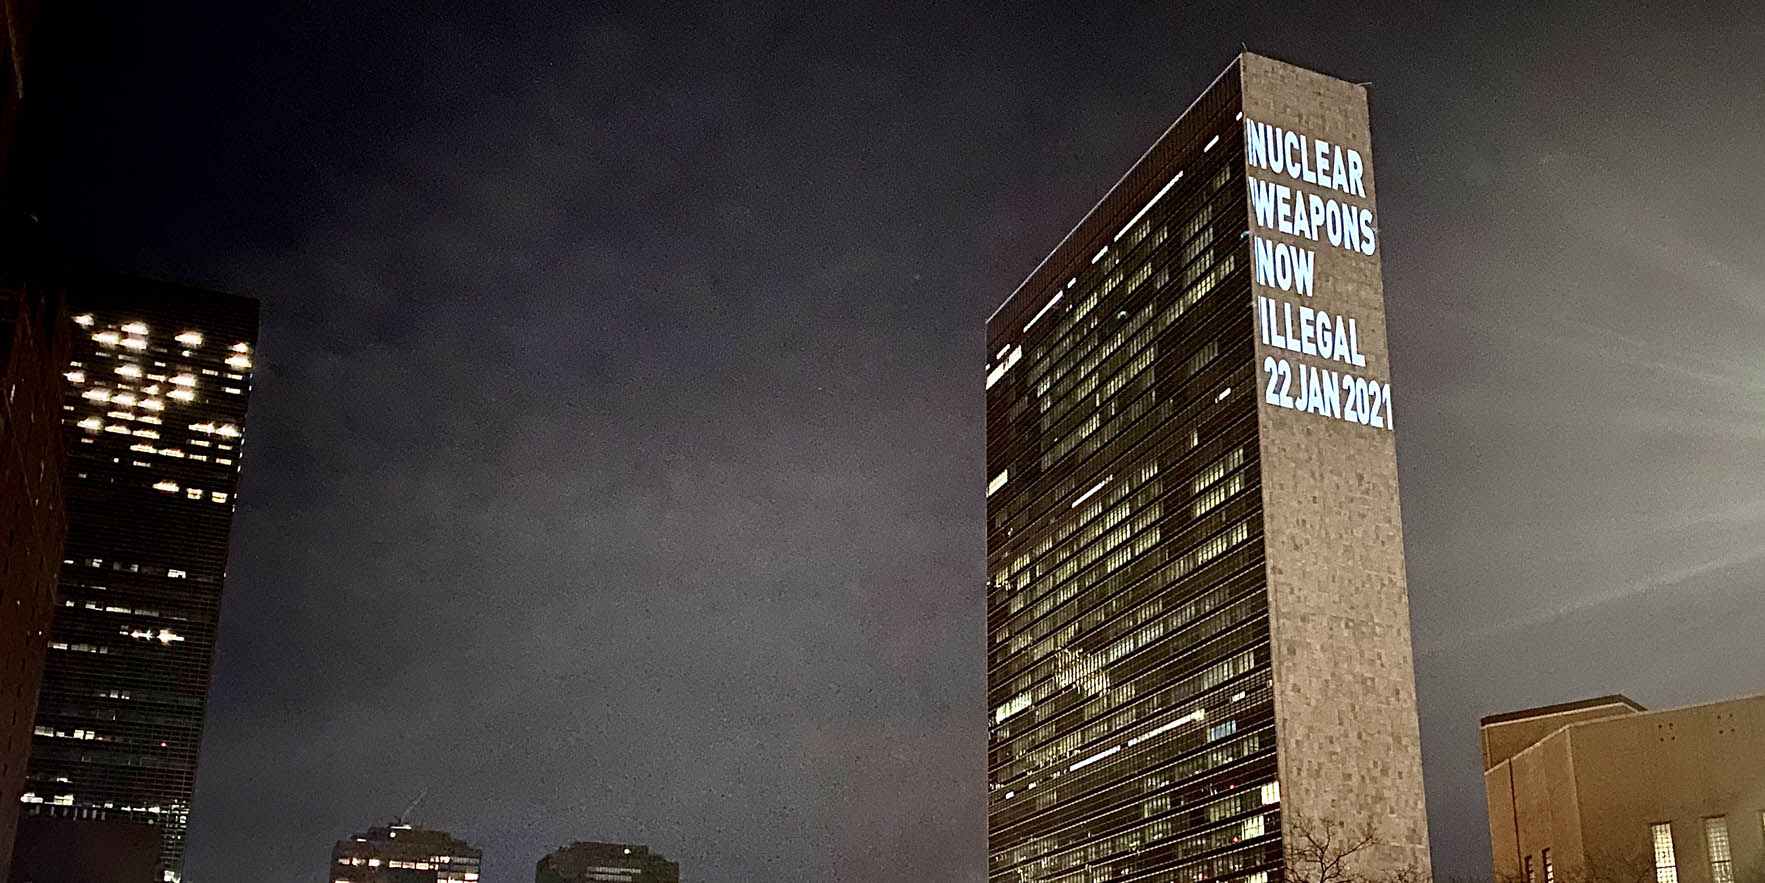 UN Headquarters with light projection reading "Nuclear weapons are now illegal"